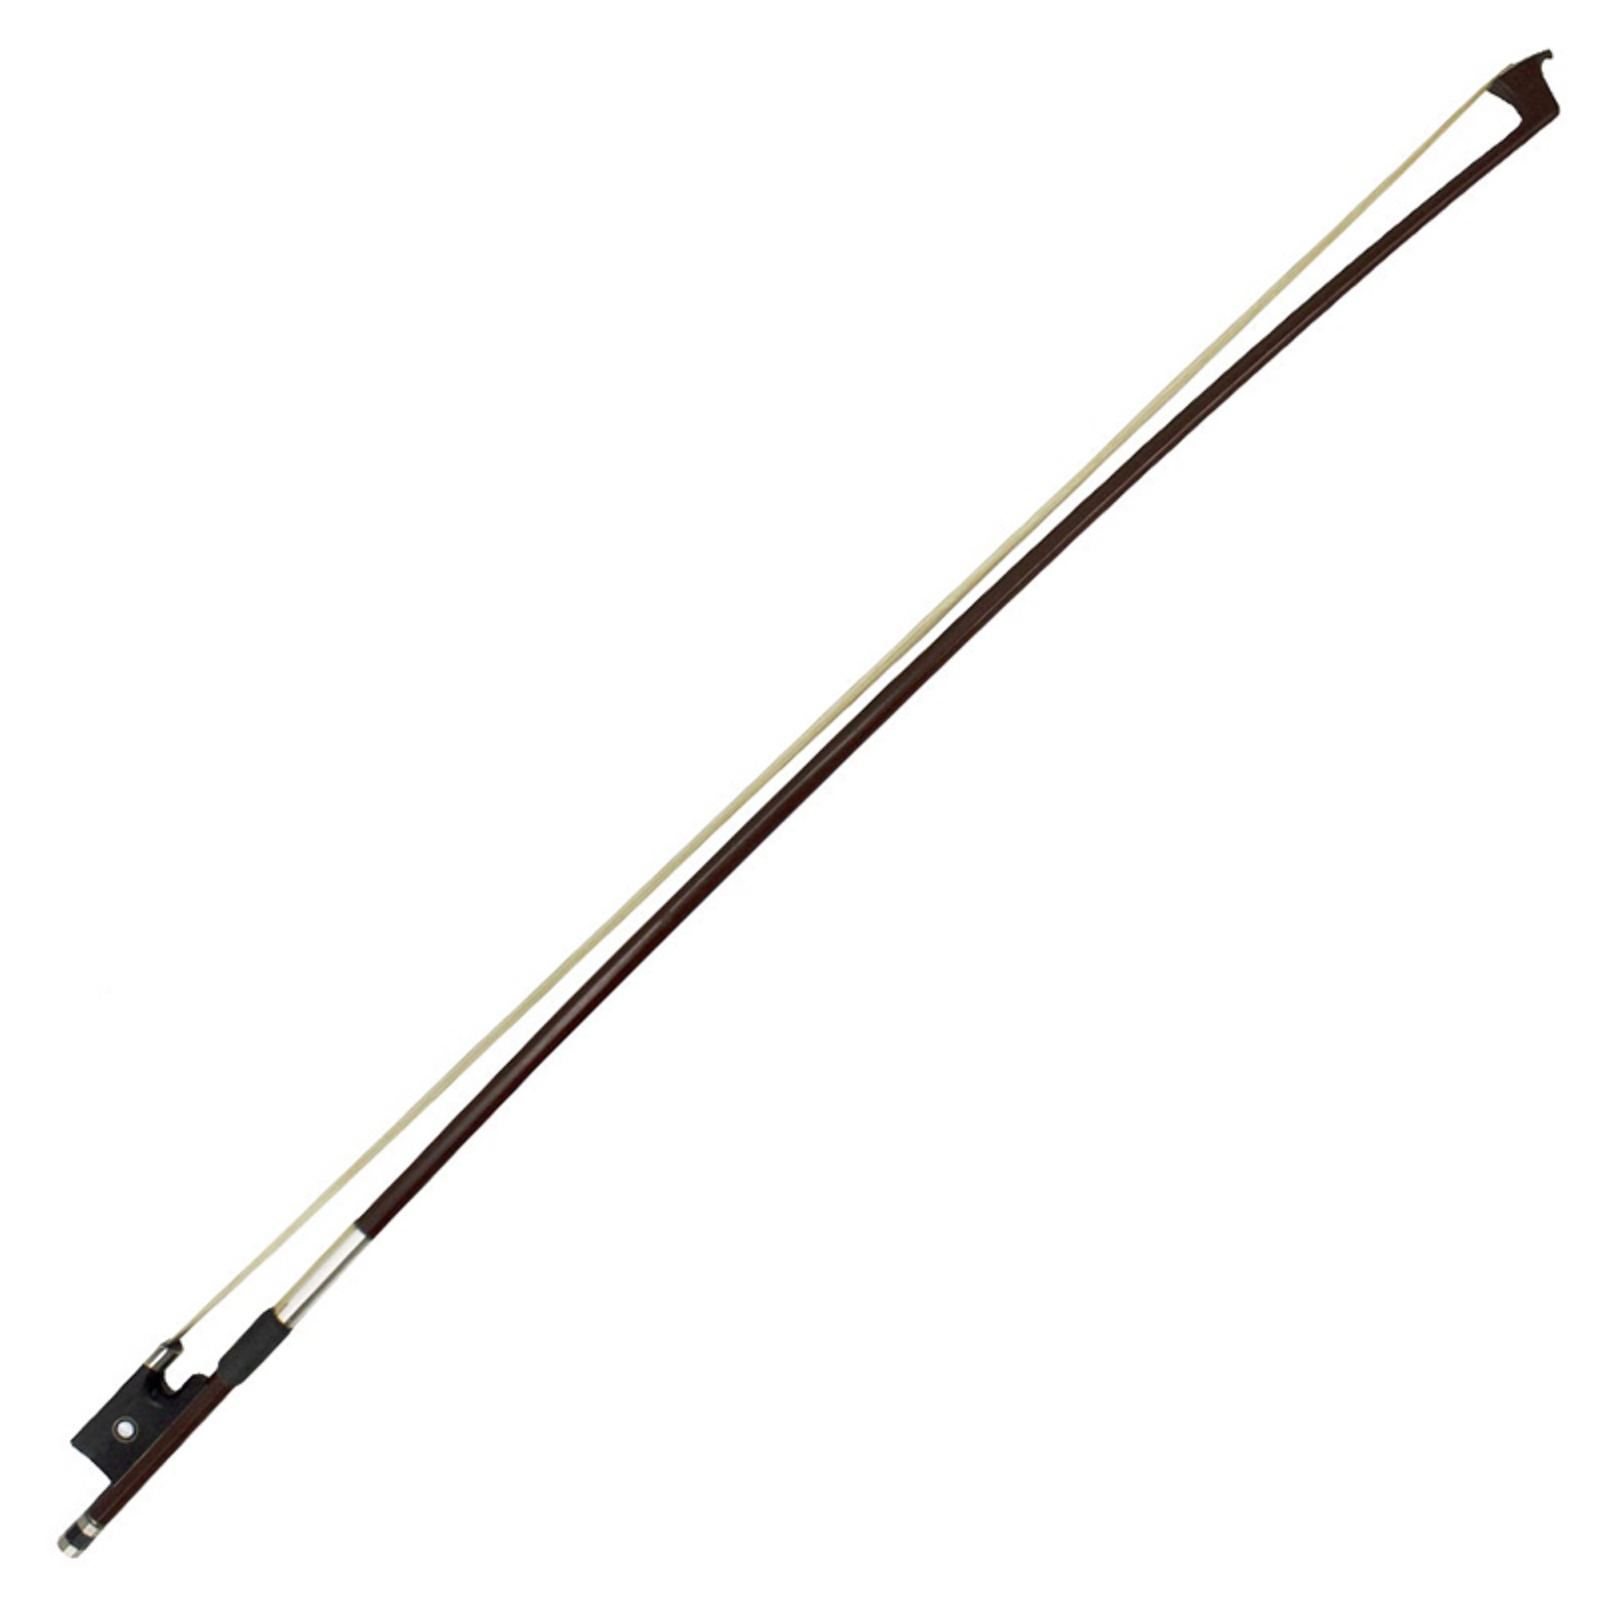 Forenza Violin Bow - 1/4 Size